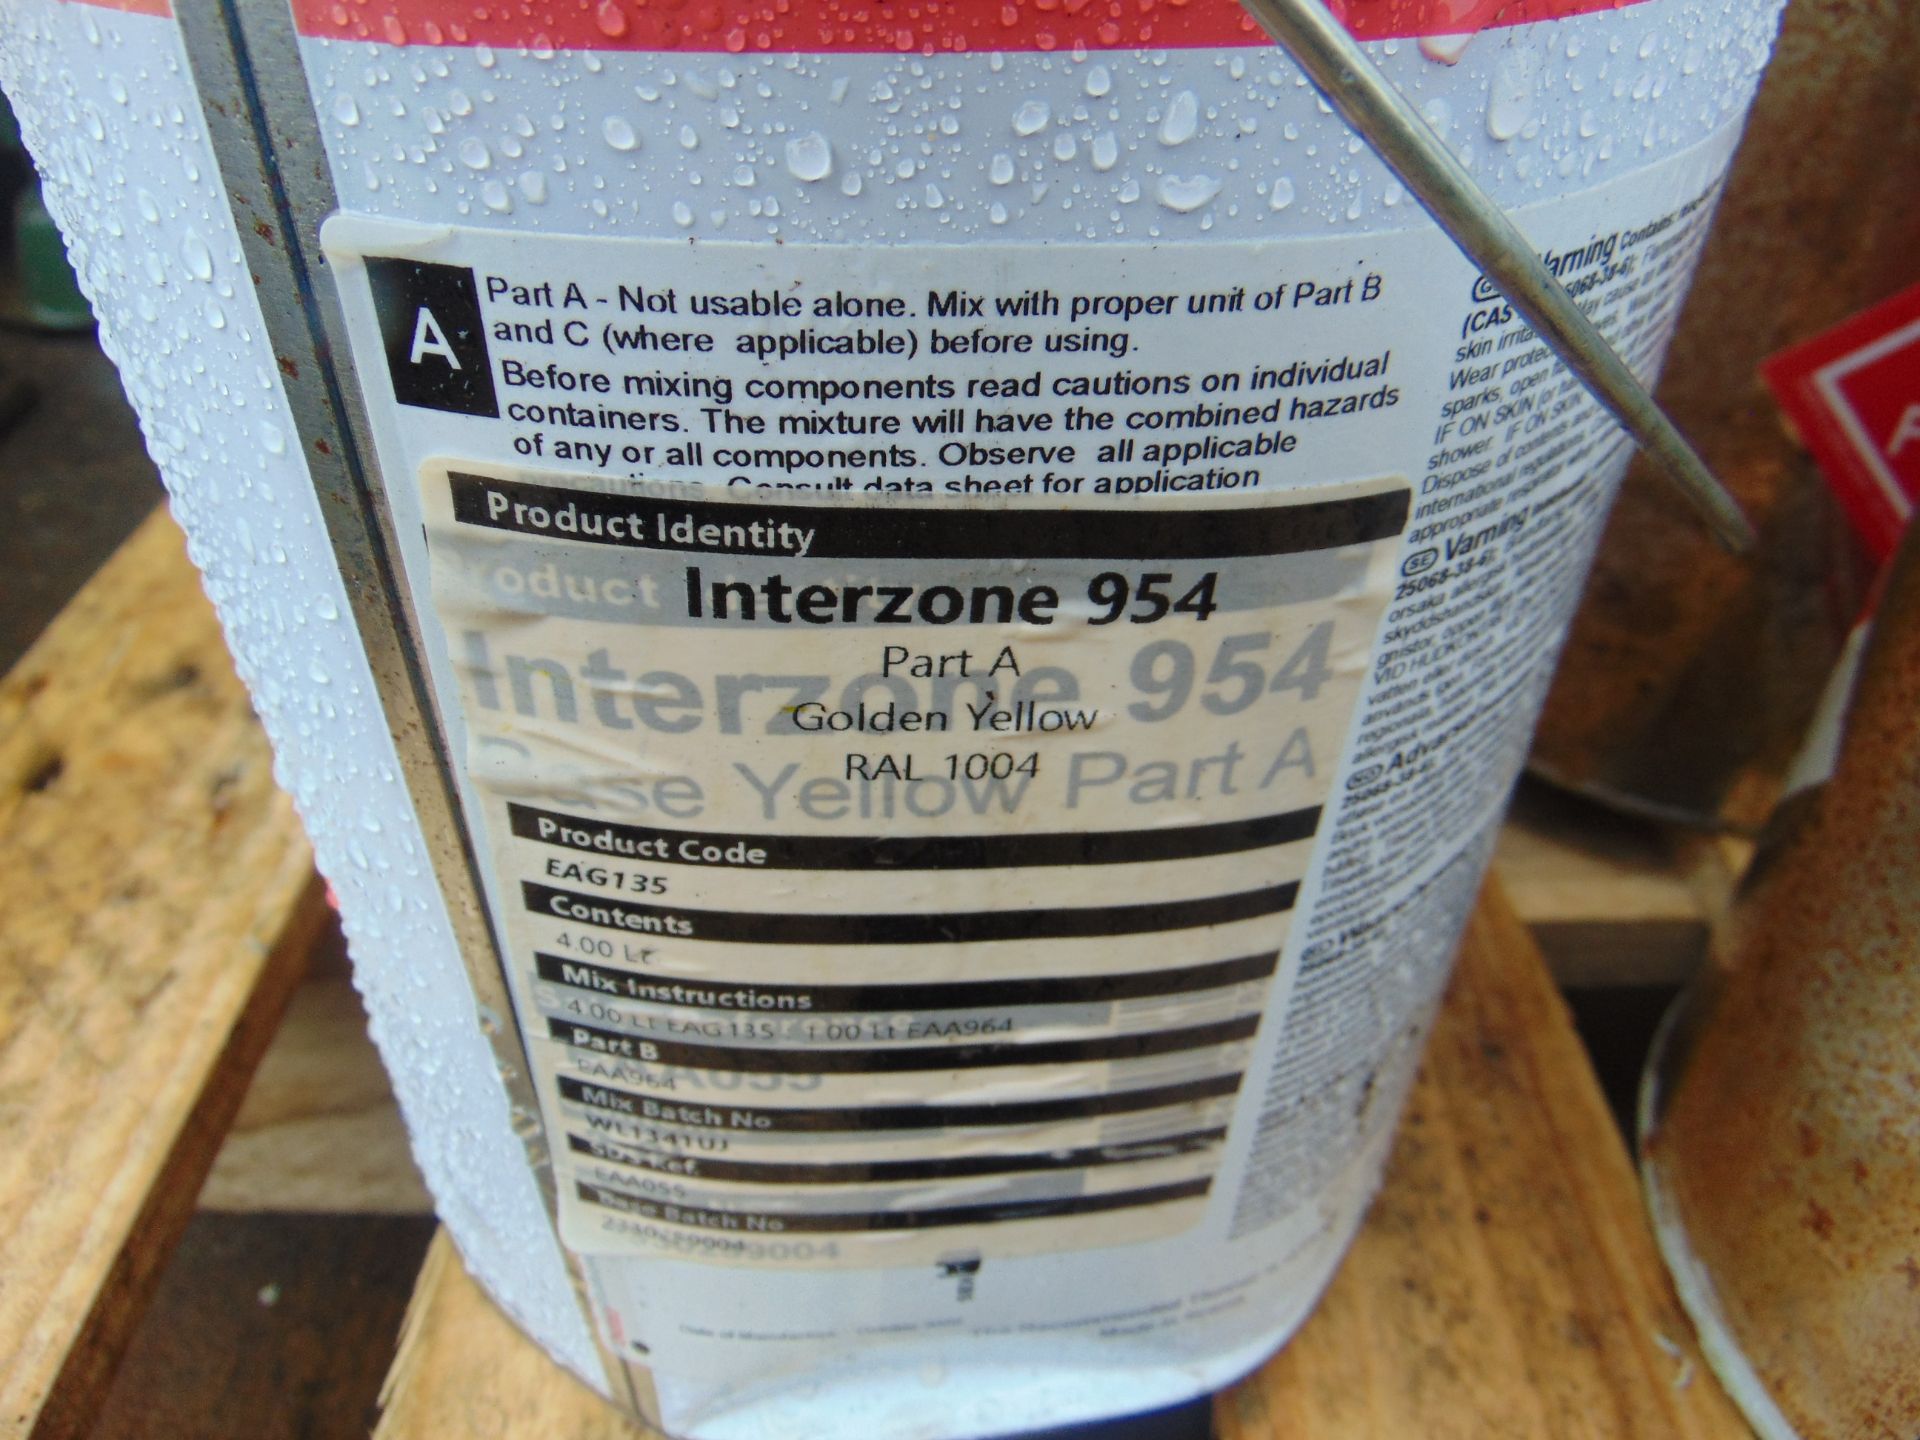 3x 4.6 Litre Drums of Simco 2 Part Epoxy Polyamide Based Paint Primer Green & 1x Interzone 954 - Image 4 of 5